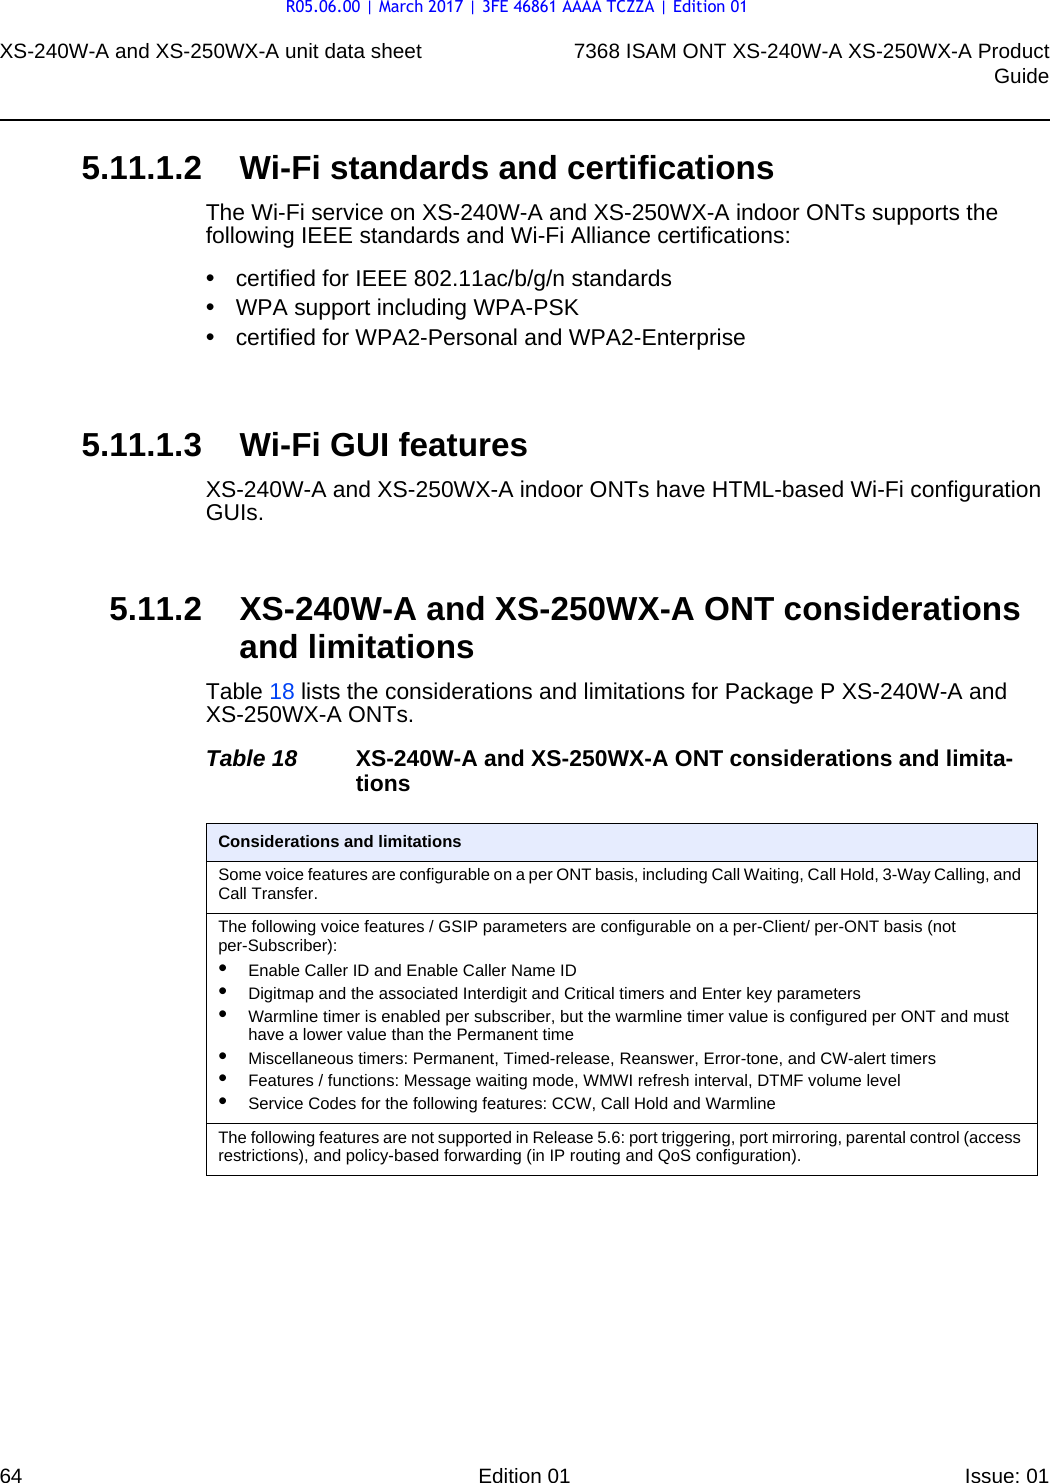 XS-240W-A and XS-250WX-A unit data sheet647368 ISAM ONT XS-240W-A XS-250WX-A ProductGuideEdition 01 Issue: 01 5.11.1.2 Wi-Fi standards and certificationsThe Wi-Fi service on XS-240W-A and XS-250WX-A indoor ONTs supports the following IEEE standards and Wi-Fi Alliance certifications:•certified for IEEE 802.11ac/b/g/n standards •WPA support including WPA-PSK•certified for WPA2-Personal and WPA2-Enterprise5.11.1.3 Wi-Fi GUI featuresXS-240W-A and XS-250WX-A indoor ONTs have HTML-based Wi-Fi configuration GUIs. 5.11.2 XS-240W-A and XS-250WX-A ONT considerations and limitationsTable 18 lists the considerations and limitations for Package P XS-240W-A and XS-250WX-A ONTs.Table 18 XS-240W-A and XS-250WX-A ONT considerations and limita-tionsConsiderations and limitationsSome voice features are configurable on a per ONT basis, including Call Waiting, Call Hold, 3-Way Calling, and Call Transfer.The following voice features / GSIP parameters are configurable on a per-Client/ per-ONT basis (not per-Subscriber):•Enable Caller ID and Enable Caller Name ID•Digitmap and the associated Interdigit and Critical timers and Enter key parameters•Warmline timer is enabled per subscriber, but the warmline timer value is configured per ONT and must have a lower value than the Permanent time•Miscellaneous timers: Permanent, Timed-release, Reanswer, Error-tone, and CW-alert timers•Features / functions: Message waiting mode, WMWI refresh interval, DTMF volume level•Service Codes for the following features: CCW, Call Hold and WarmlineThe following features are not supported in Release 5.6: port triggering, port mirroring, parental control (access restrictions), and policy-based forwarding (in IP routing and QoS configuration).R05.06.00 | March 2017 | 3FE 46861 AAAA TCZZA | Edition 01